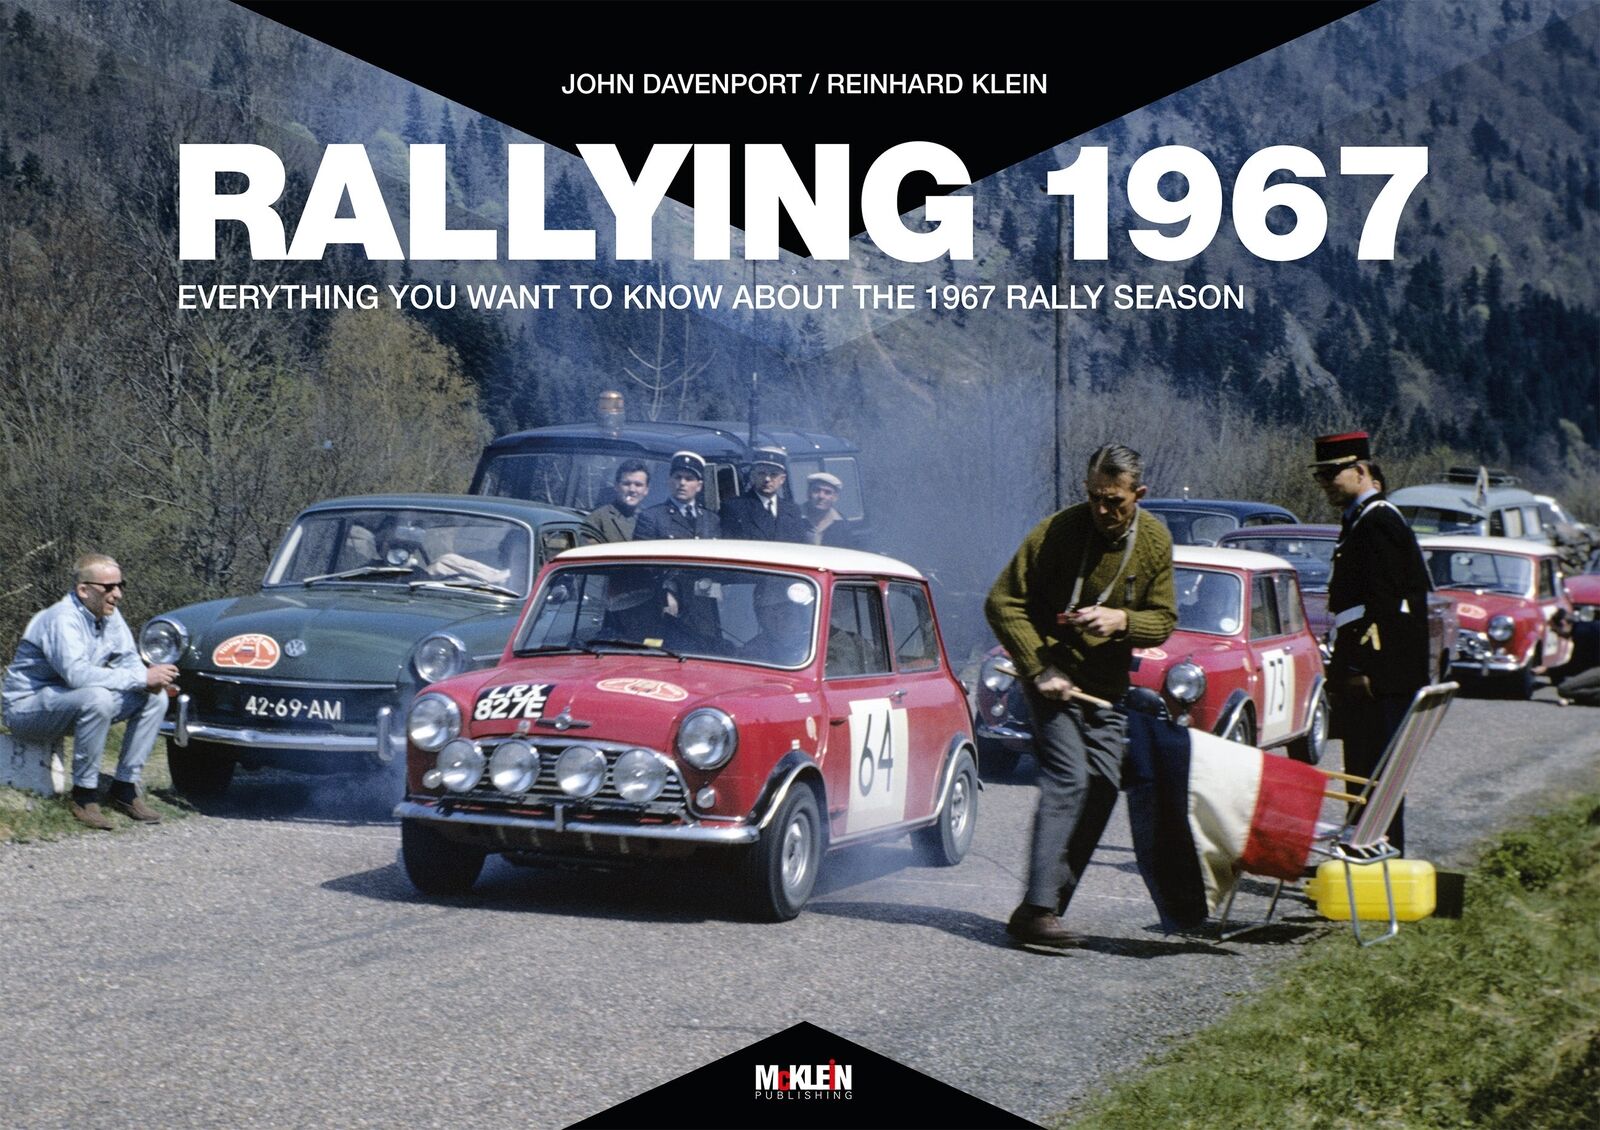 Rallying 1967: Everything You Want To Know About The 1967 Rally Season Book